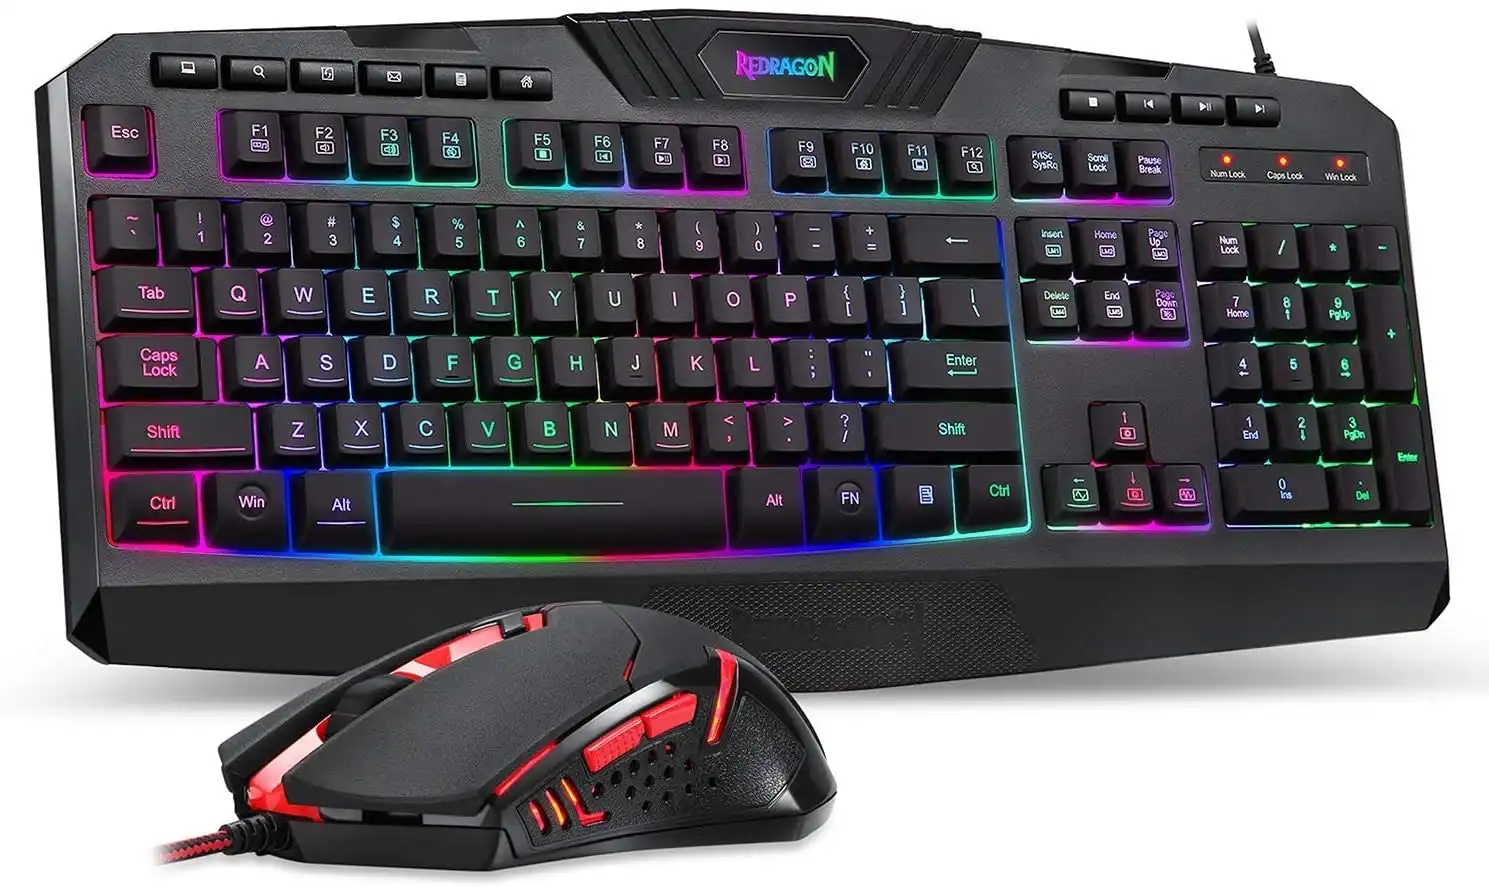 Redragon S101 Wired Gaming Keyboard and Mouse Combo RGB Backlit Gaming Keyboard with Multimedia Keys Wrist Rest and Red Backlit Gaming Mouse 3200 DPI